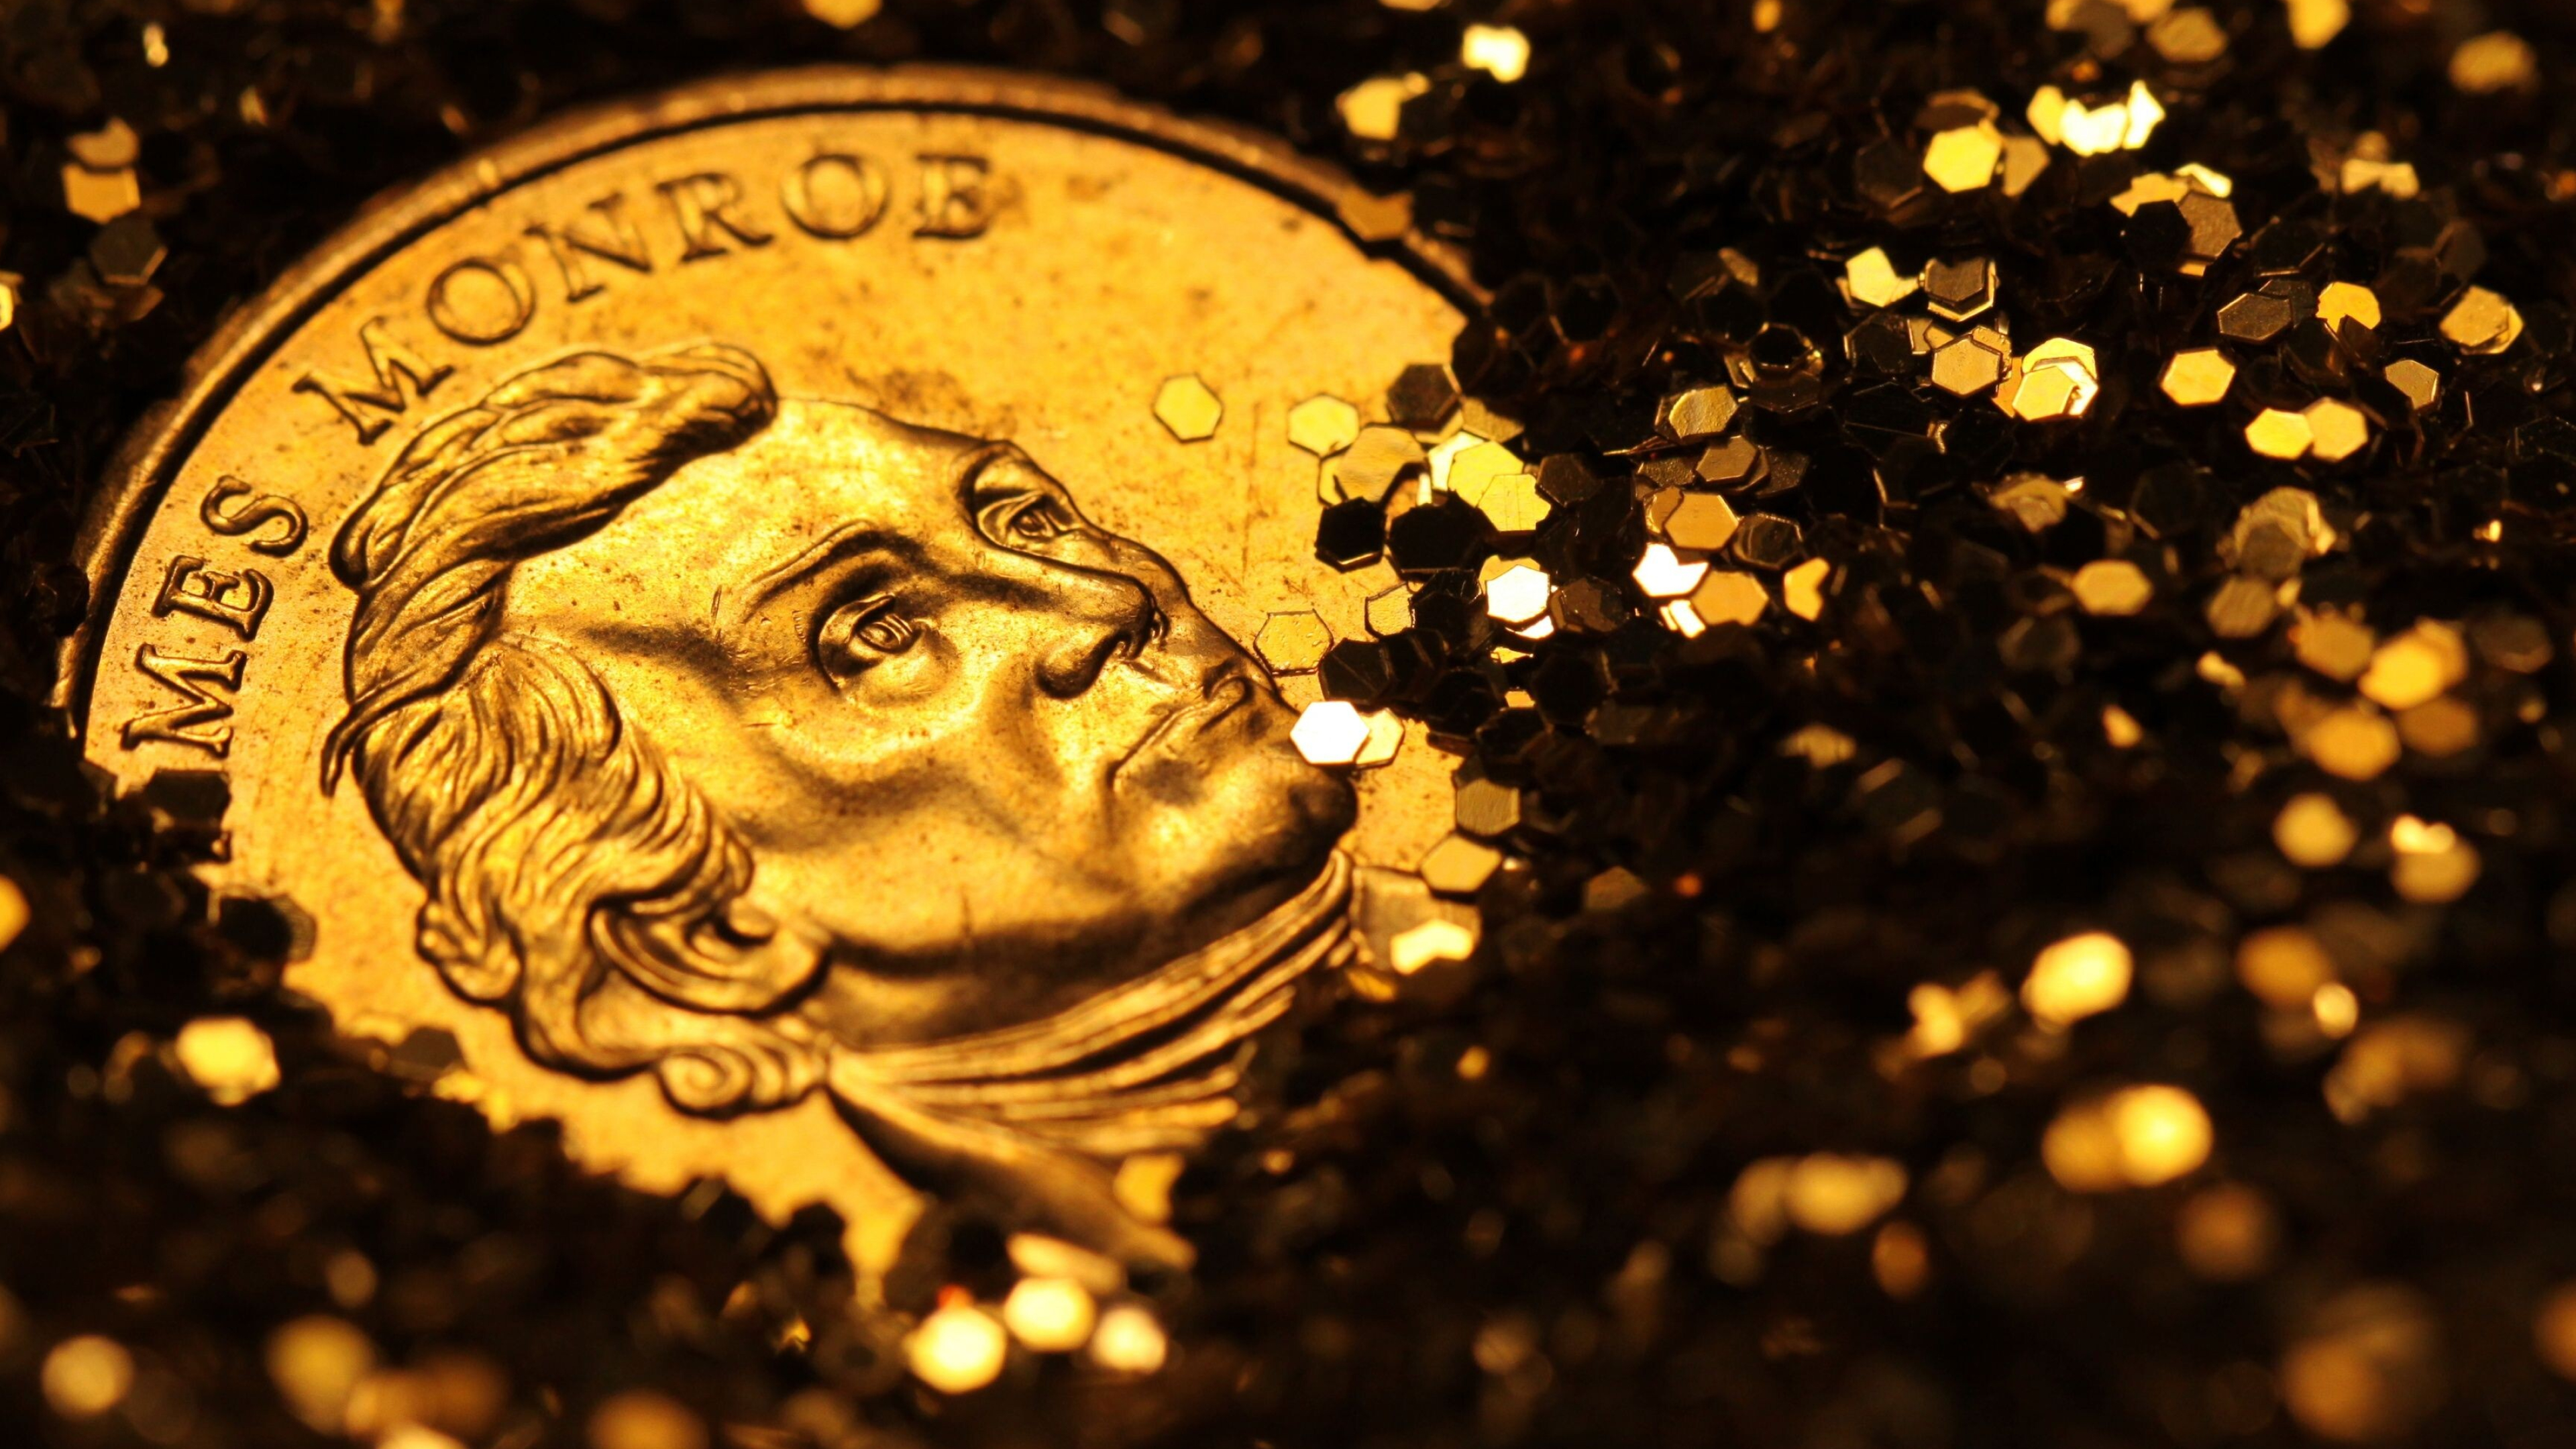 Gold Coins: James Monroe $1 coin, Created by the United States Mint, Sparkling confetti. 3840x2160 4K Wallpaper.